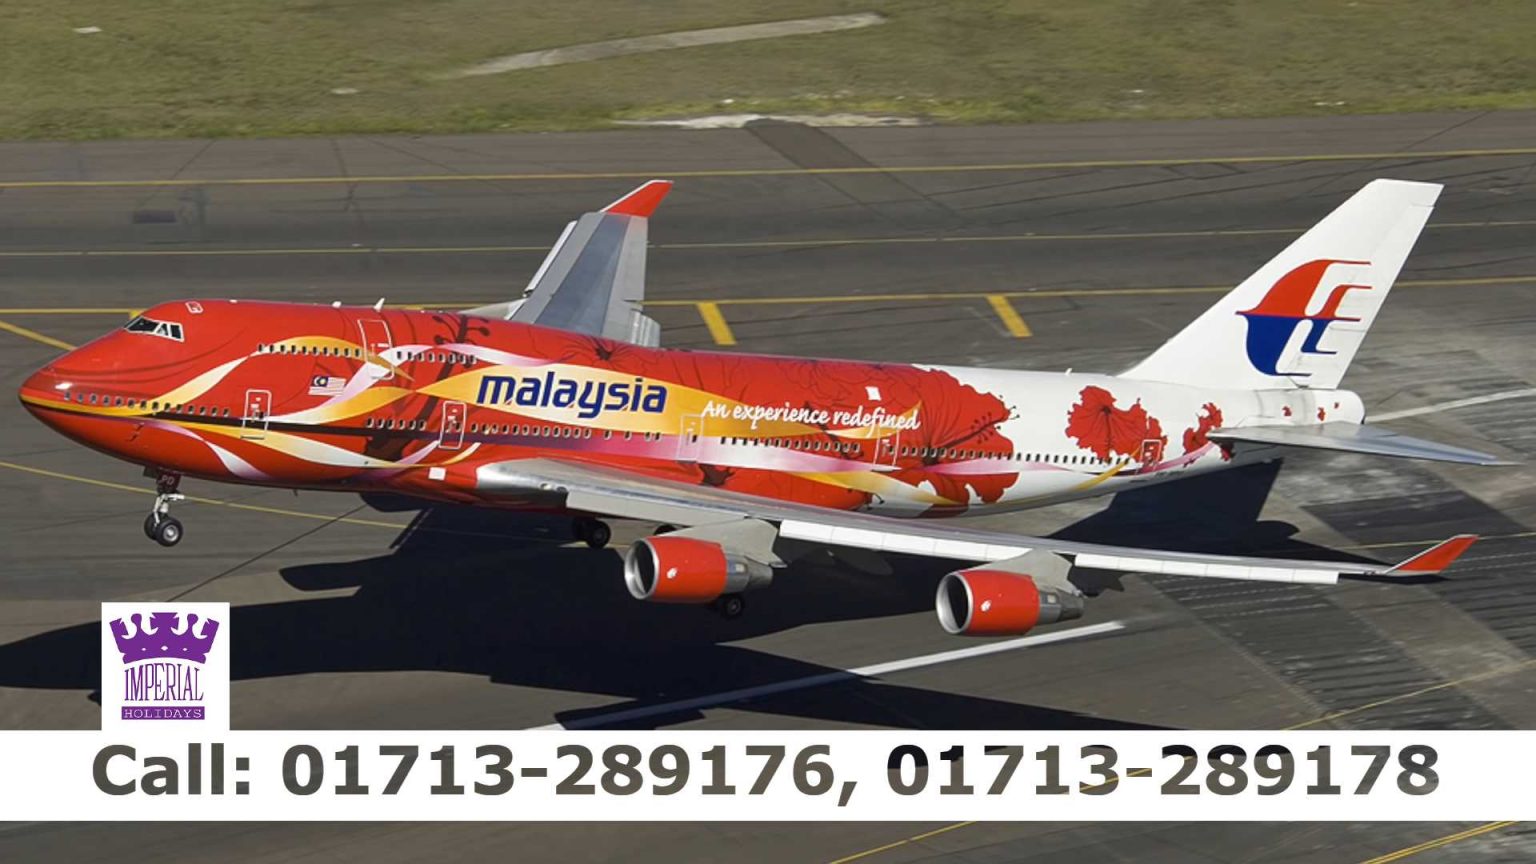 Malaysia Airlines Dhaka Office Bangladesh  Contact Number, Address